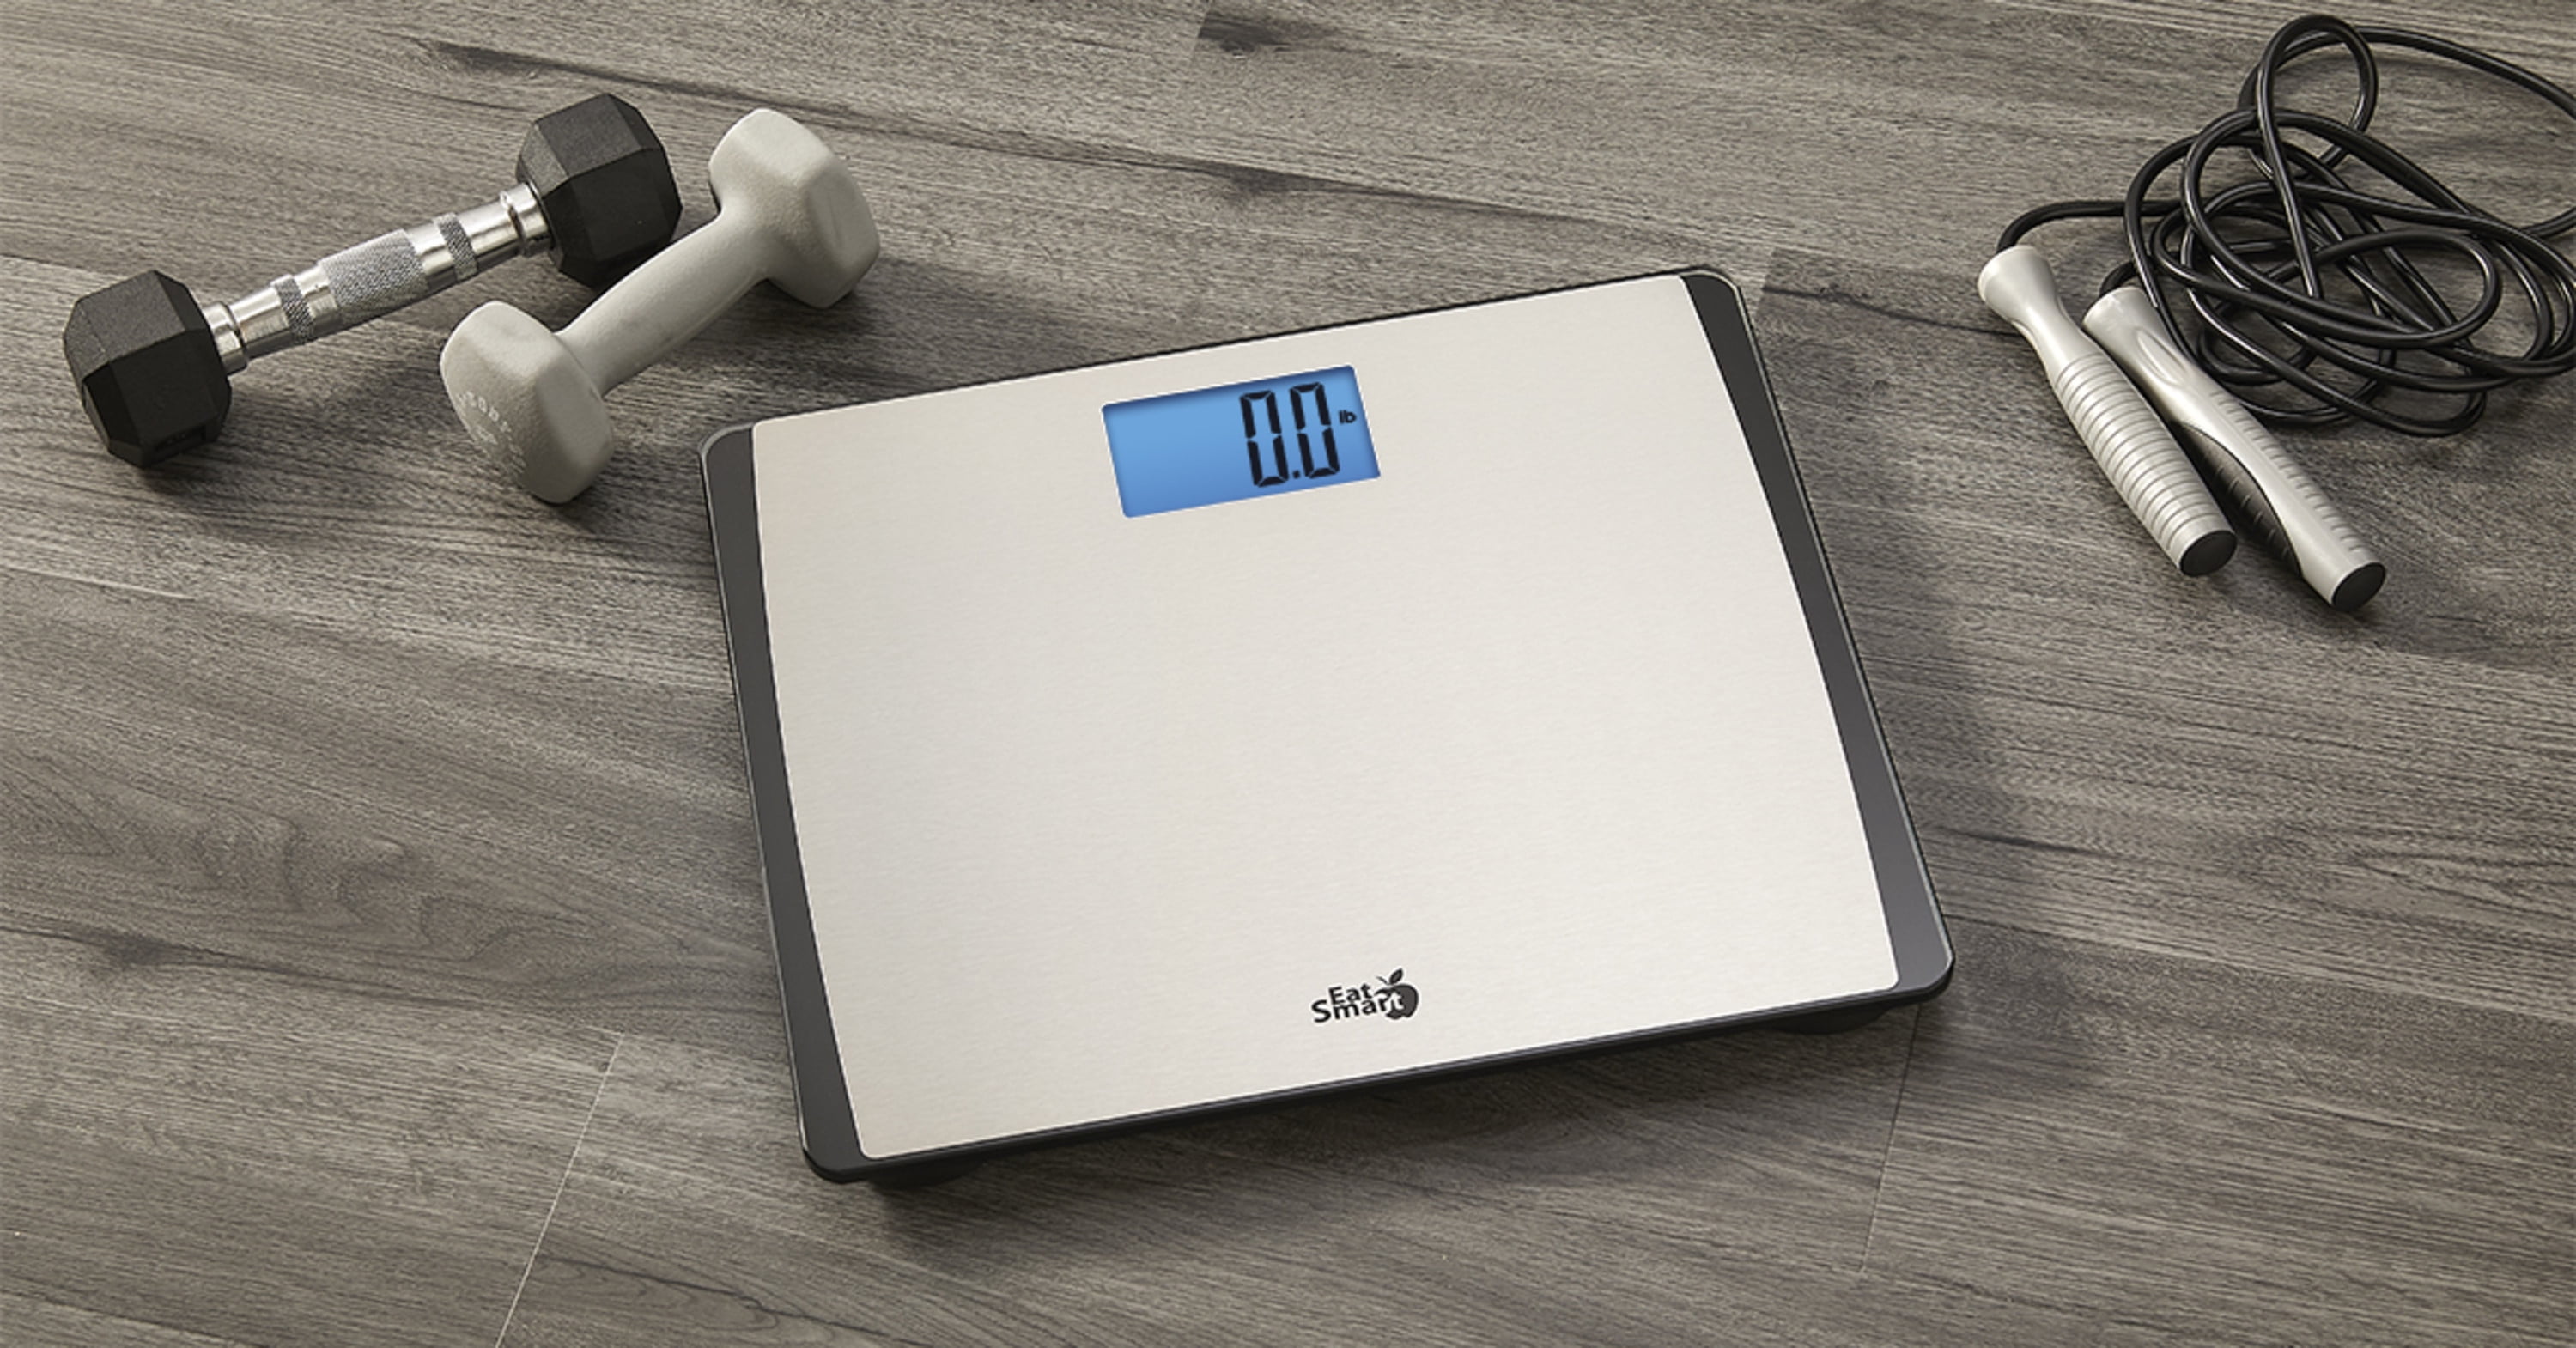  RunSTAR 550lb Bathroom Digital Scale for Body Weight with Ultra- Wide Platform and Large LCD Display, Accurate High Precision Scale with  Extra-High Capacity, FSA HSA Eligible : Health & Household